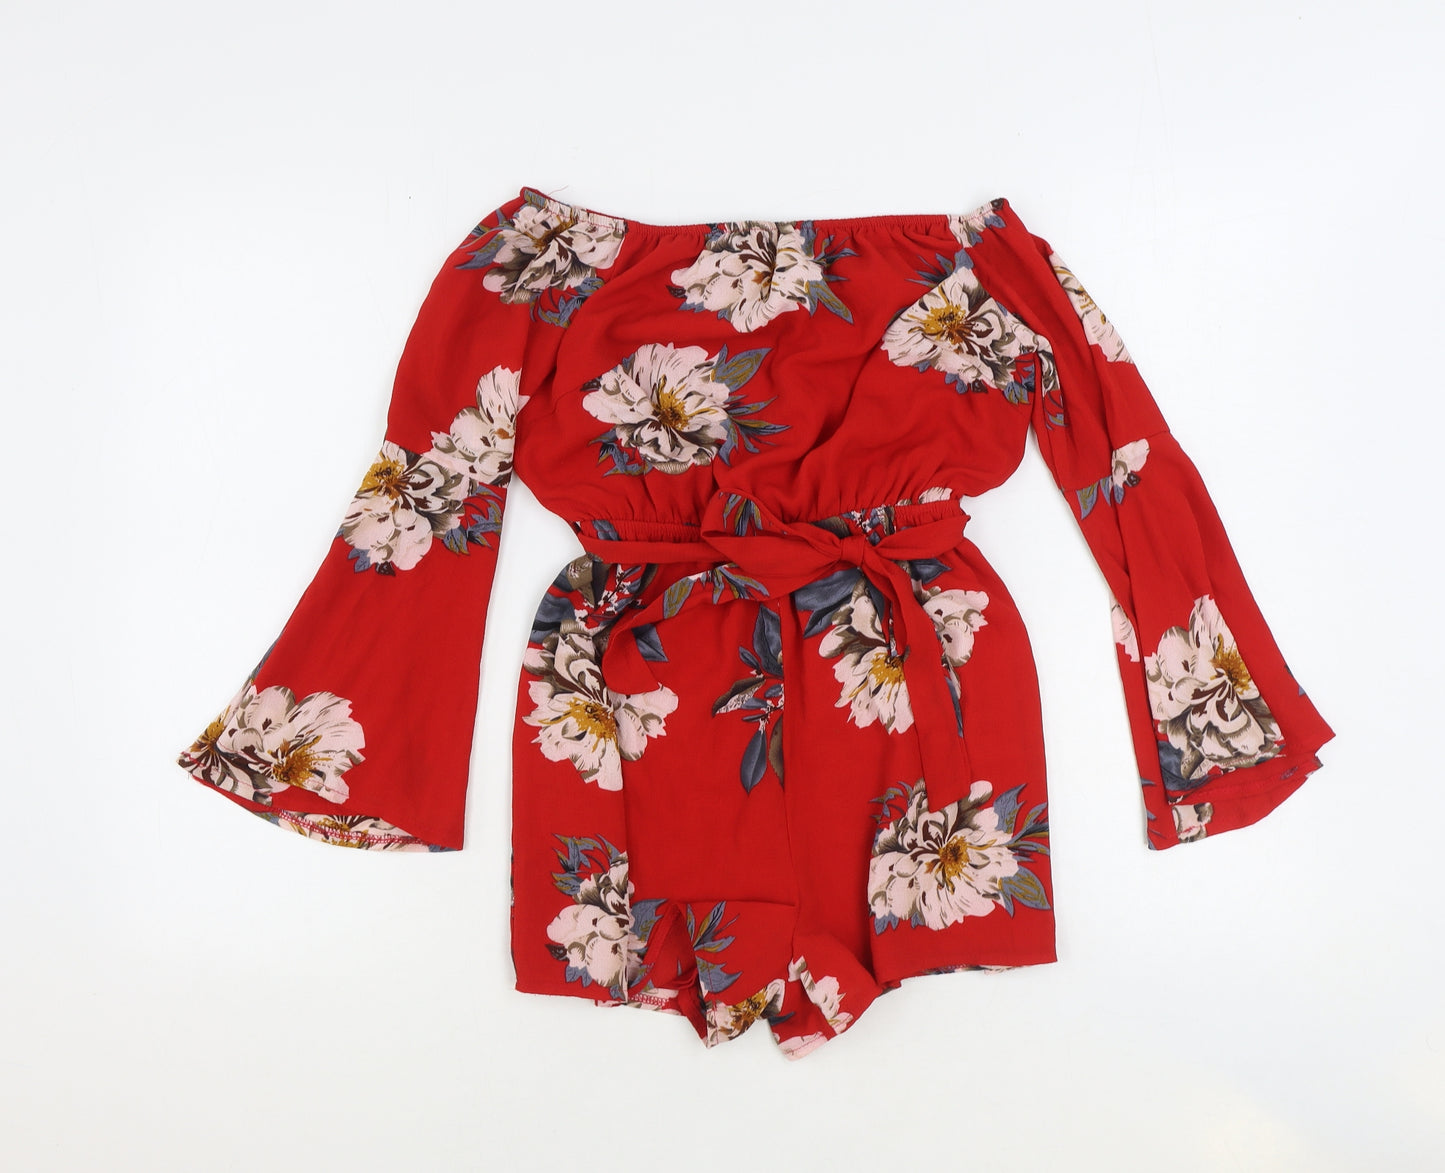 PARISIAN SIGNATURE Womens Red Floral Polyester Playsuit One-Piece Size 10 Pullover